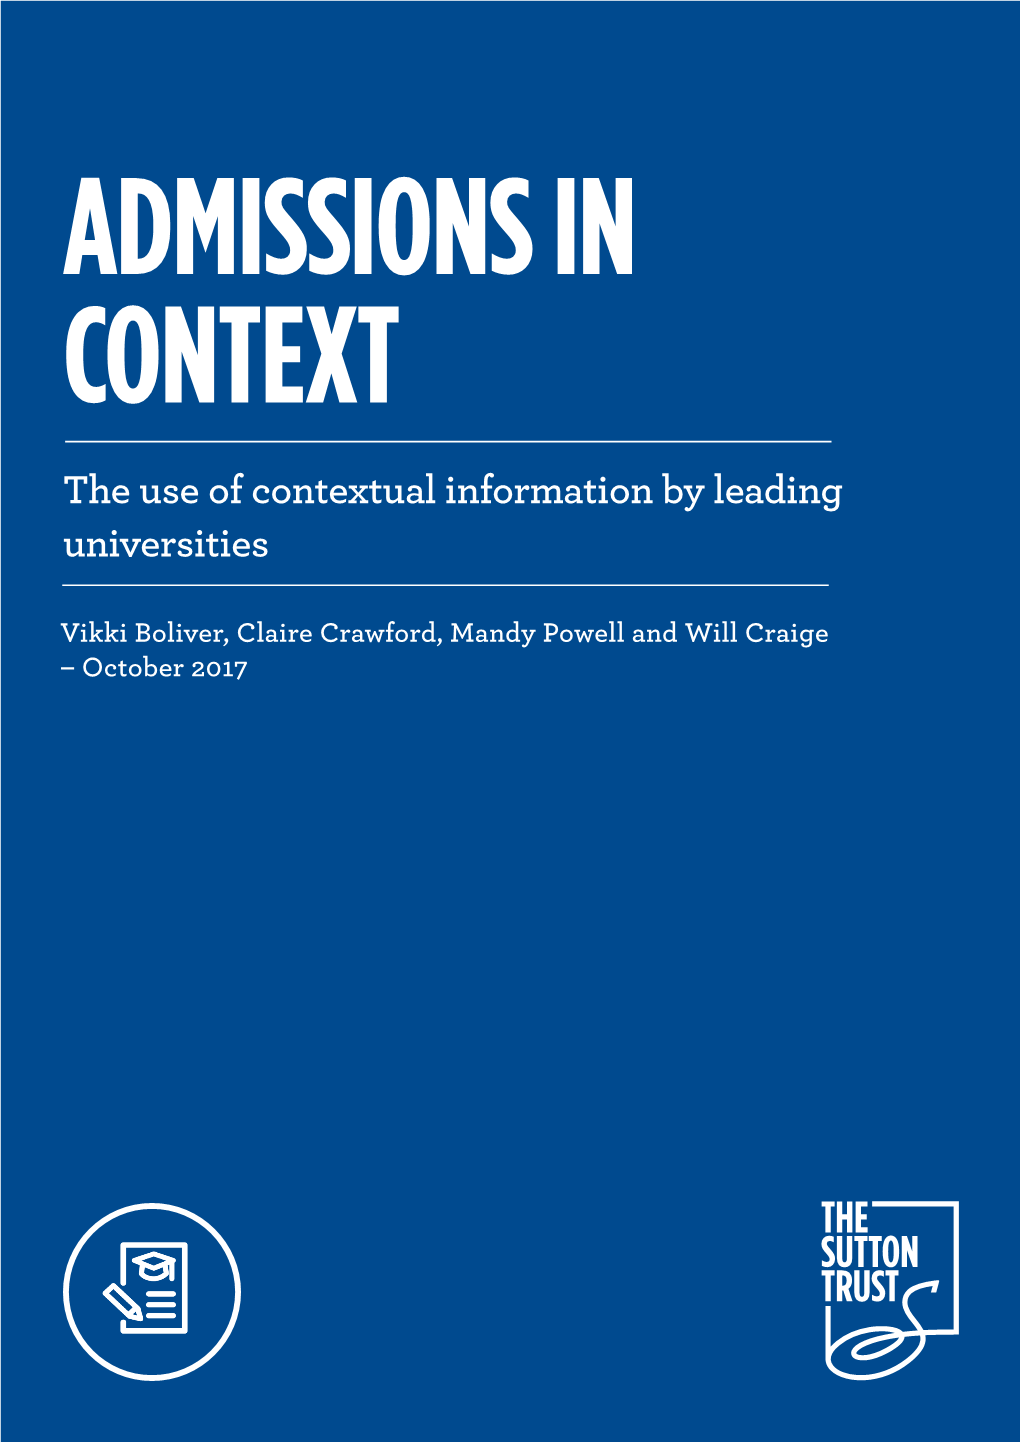 The Use of Contextual Information by Leading Universities